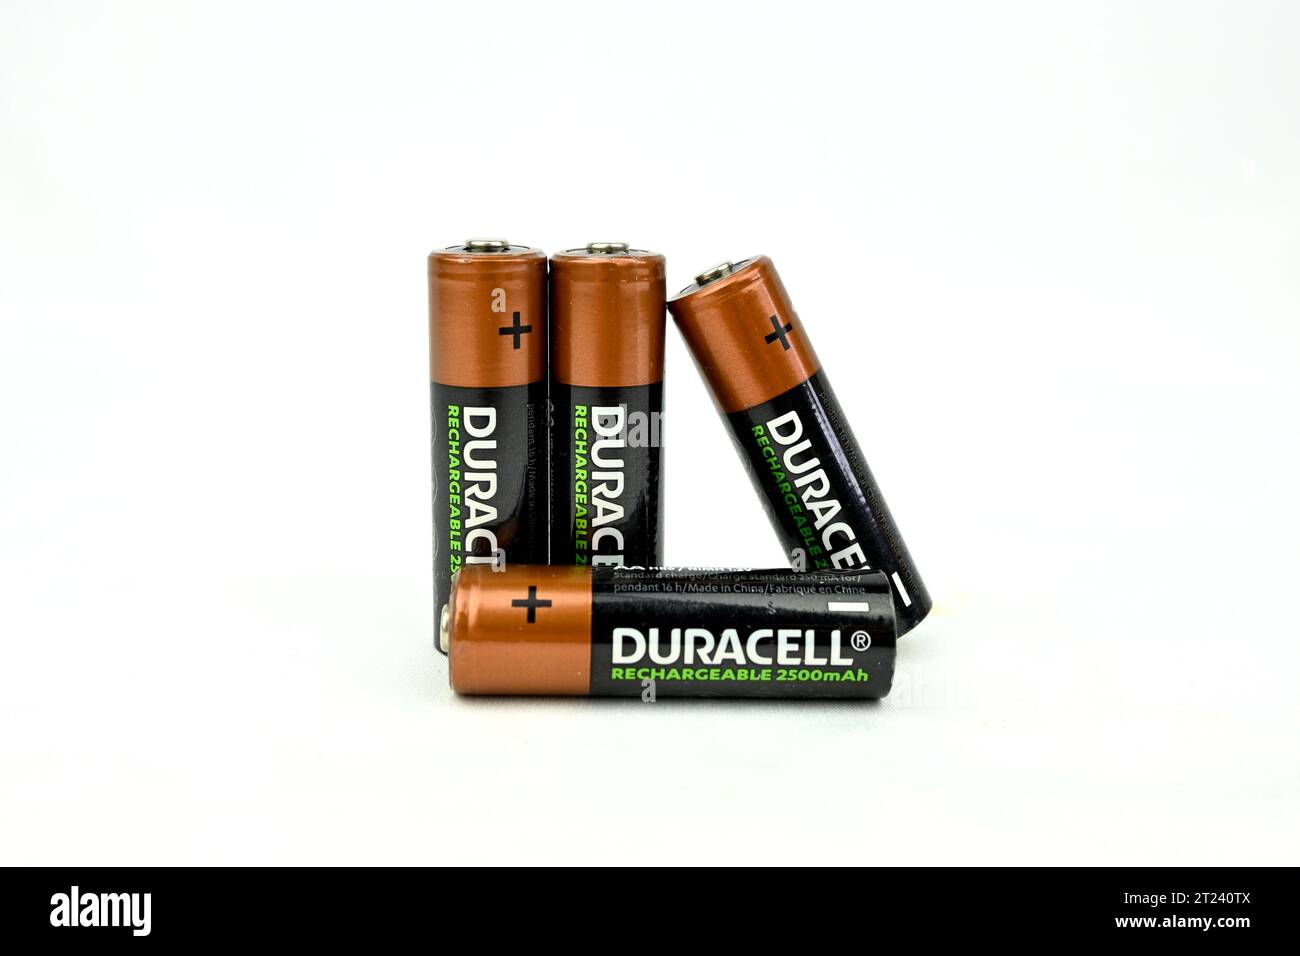 2 AA Duracell Rechargeable - 2500mAh - Piles rechargeables